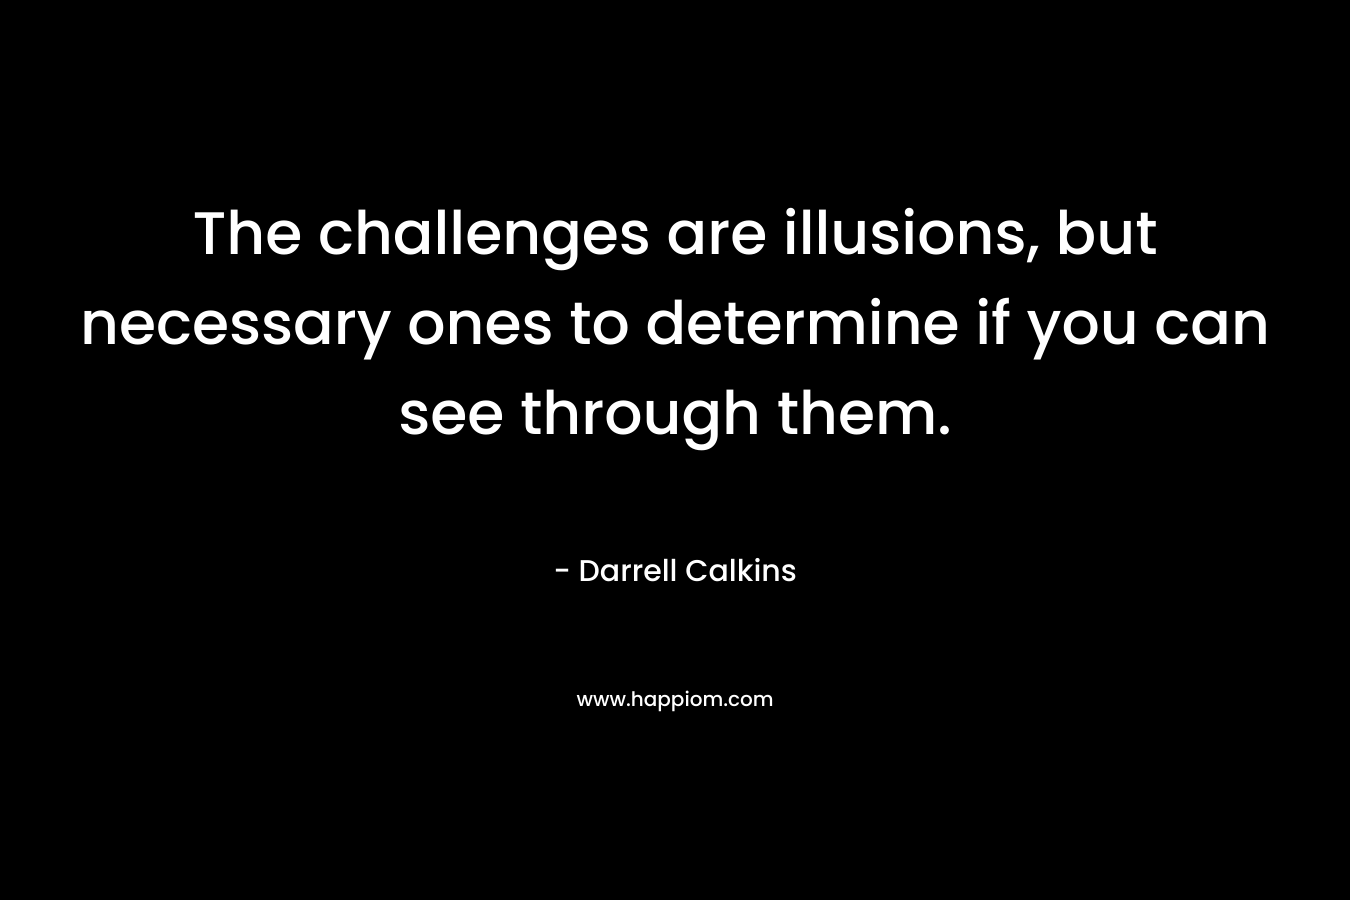 The challenges are illusions, but necessary ones to determine if you can see through them.